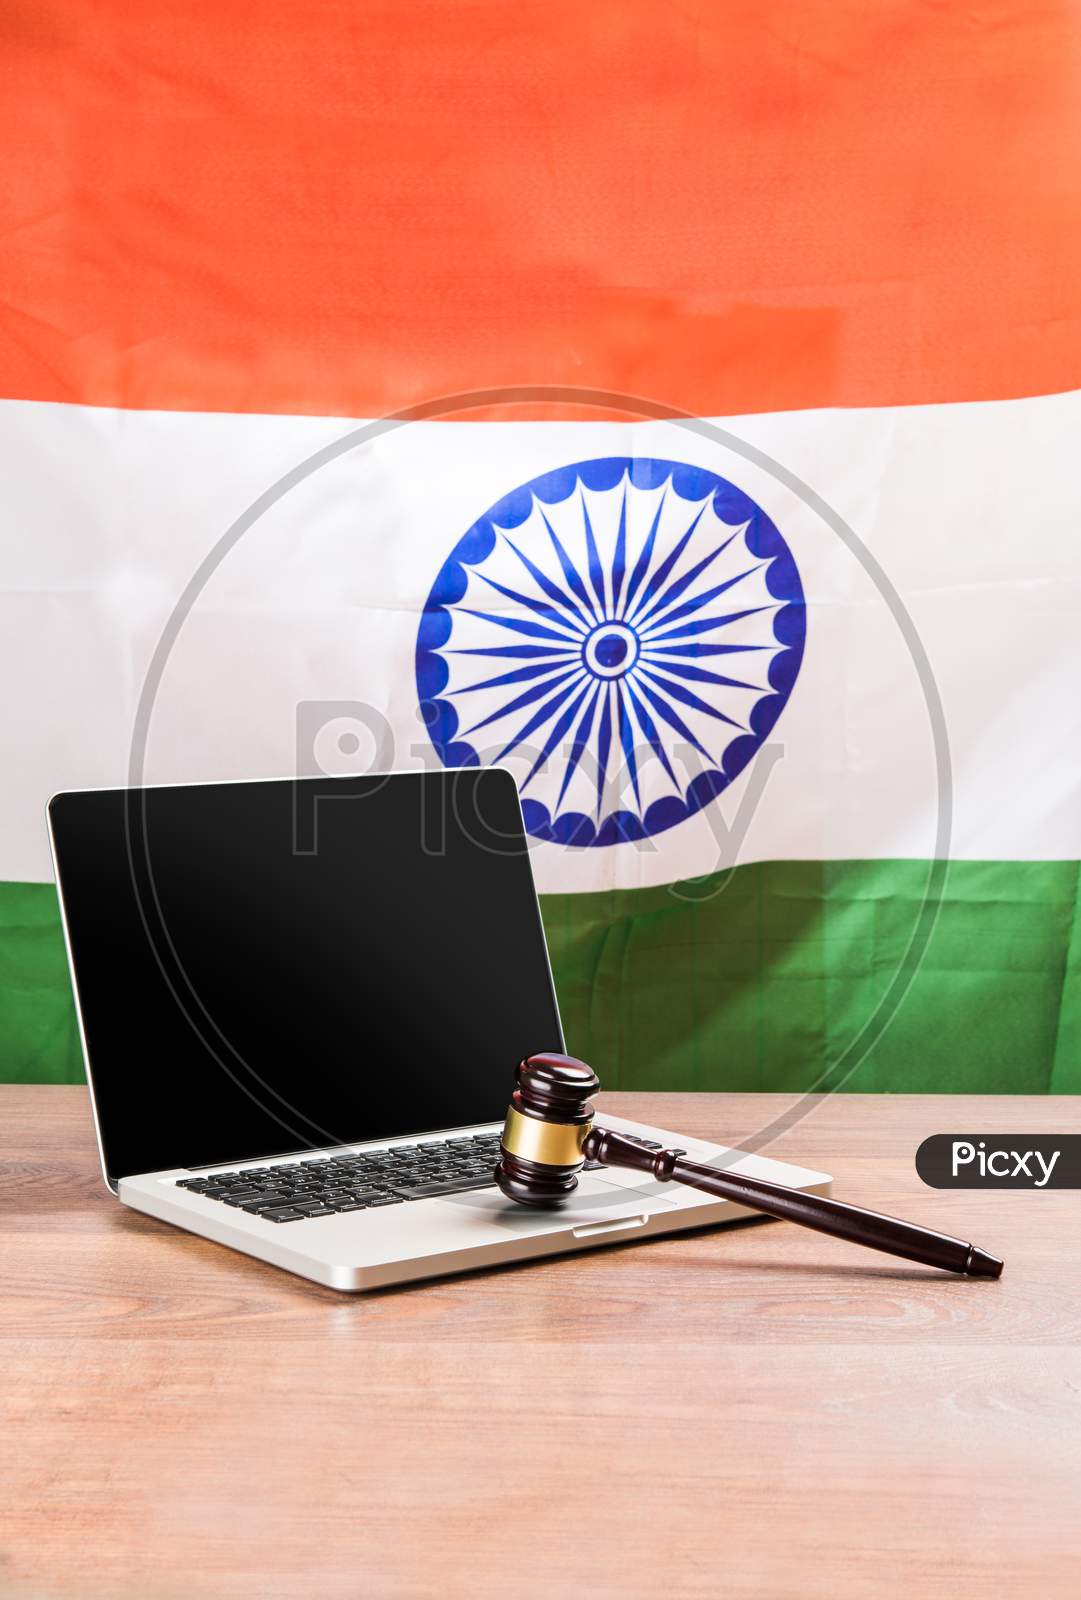 Indian Cyber law, information technology and Indian law